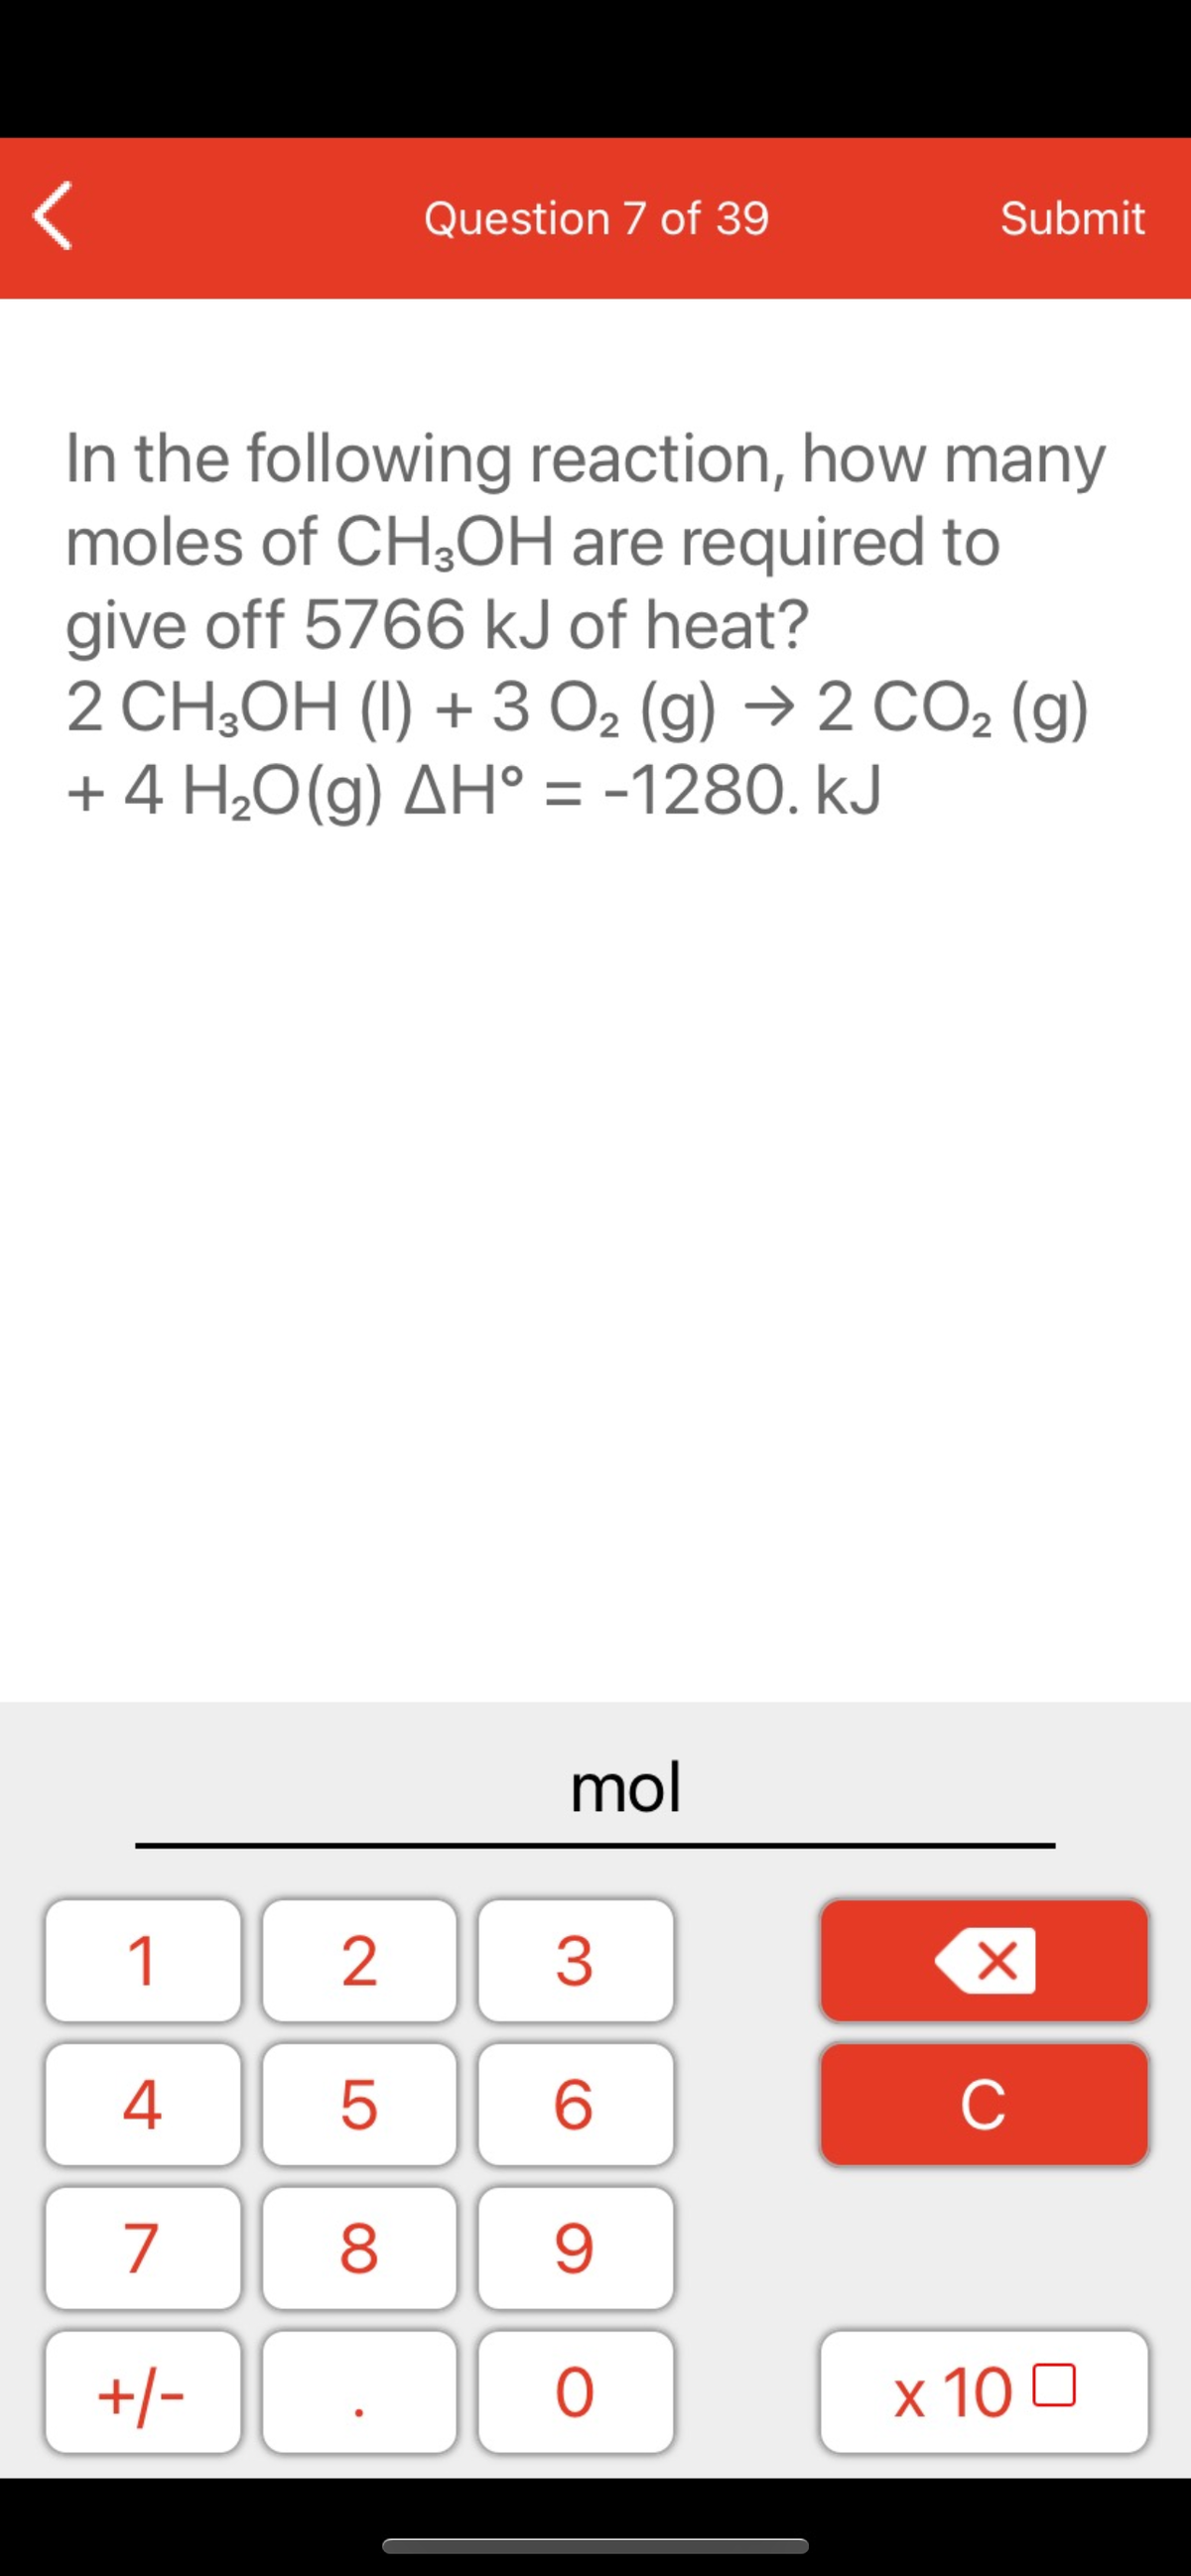 Question 7 of 39
Submit
In the following reaction, how many
moles of CH,OH are required to
give off 5766 kJ of heat?
2 CH,OH (I) + 3 O2 (g) → 2 CO2 (g)
+ 4 H¿O(g) AH° = -1280. kJ
mol
1
2
3
C
7
8.
+/-
x 10 0
